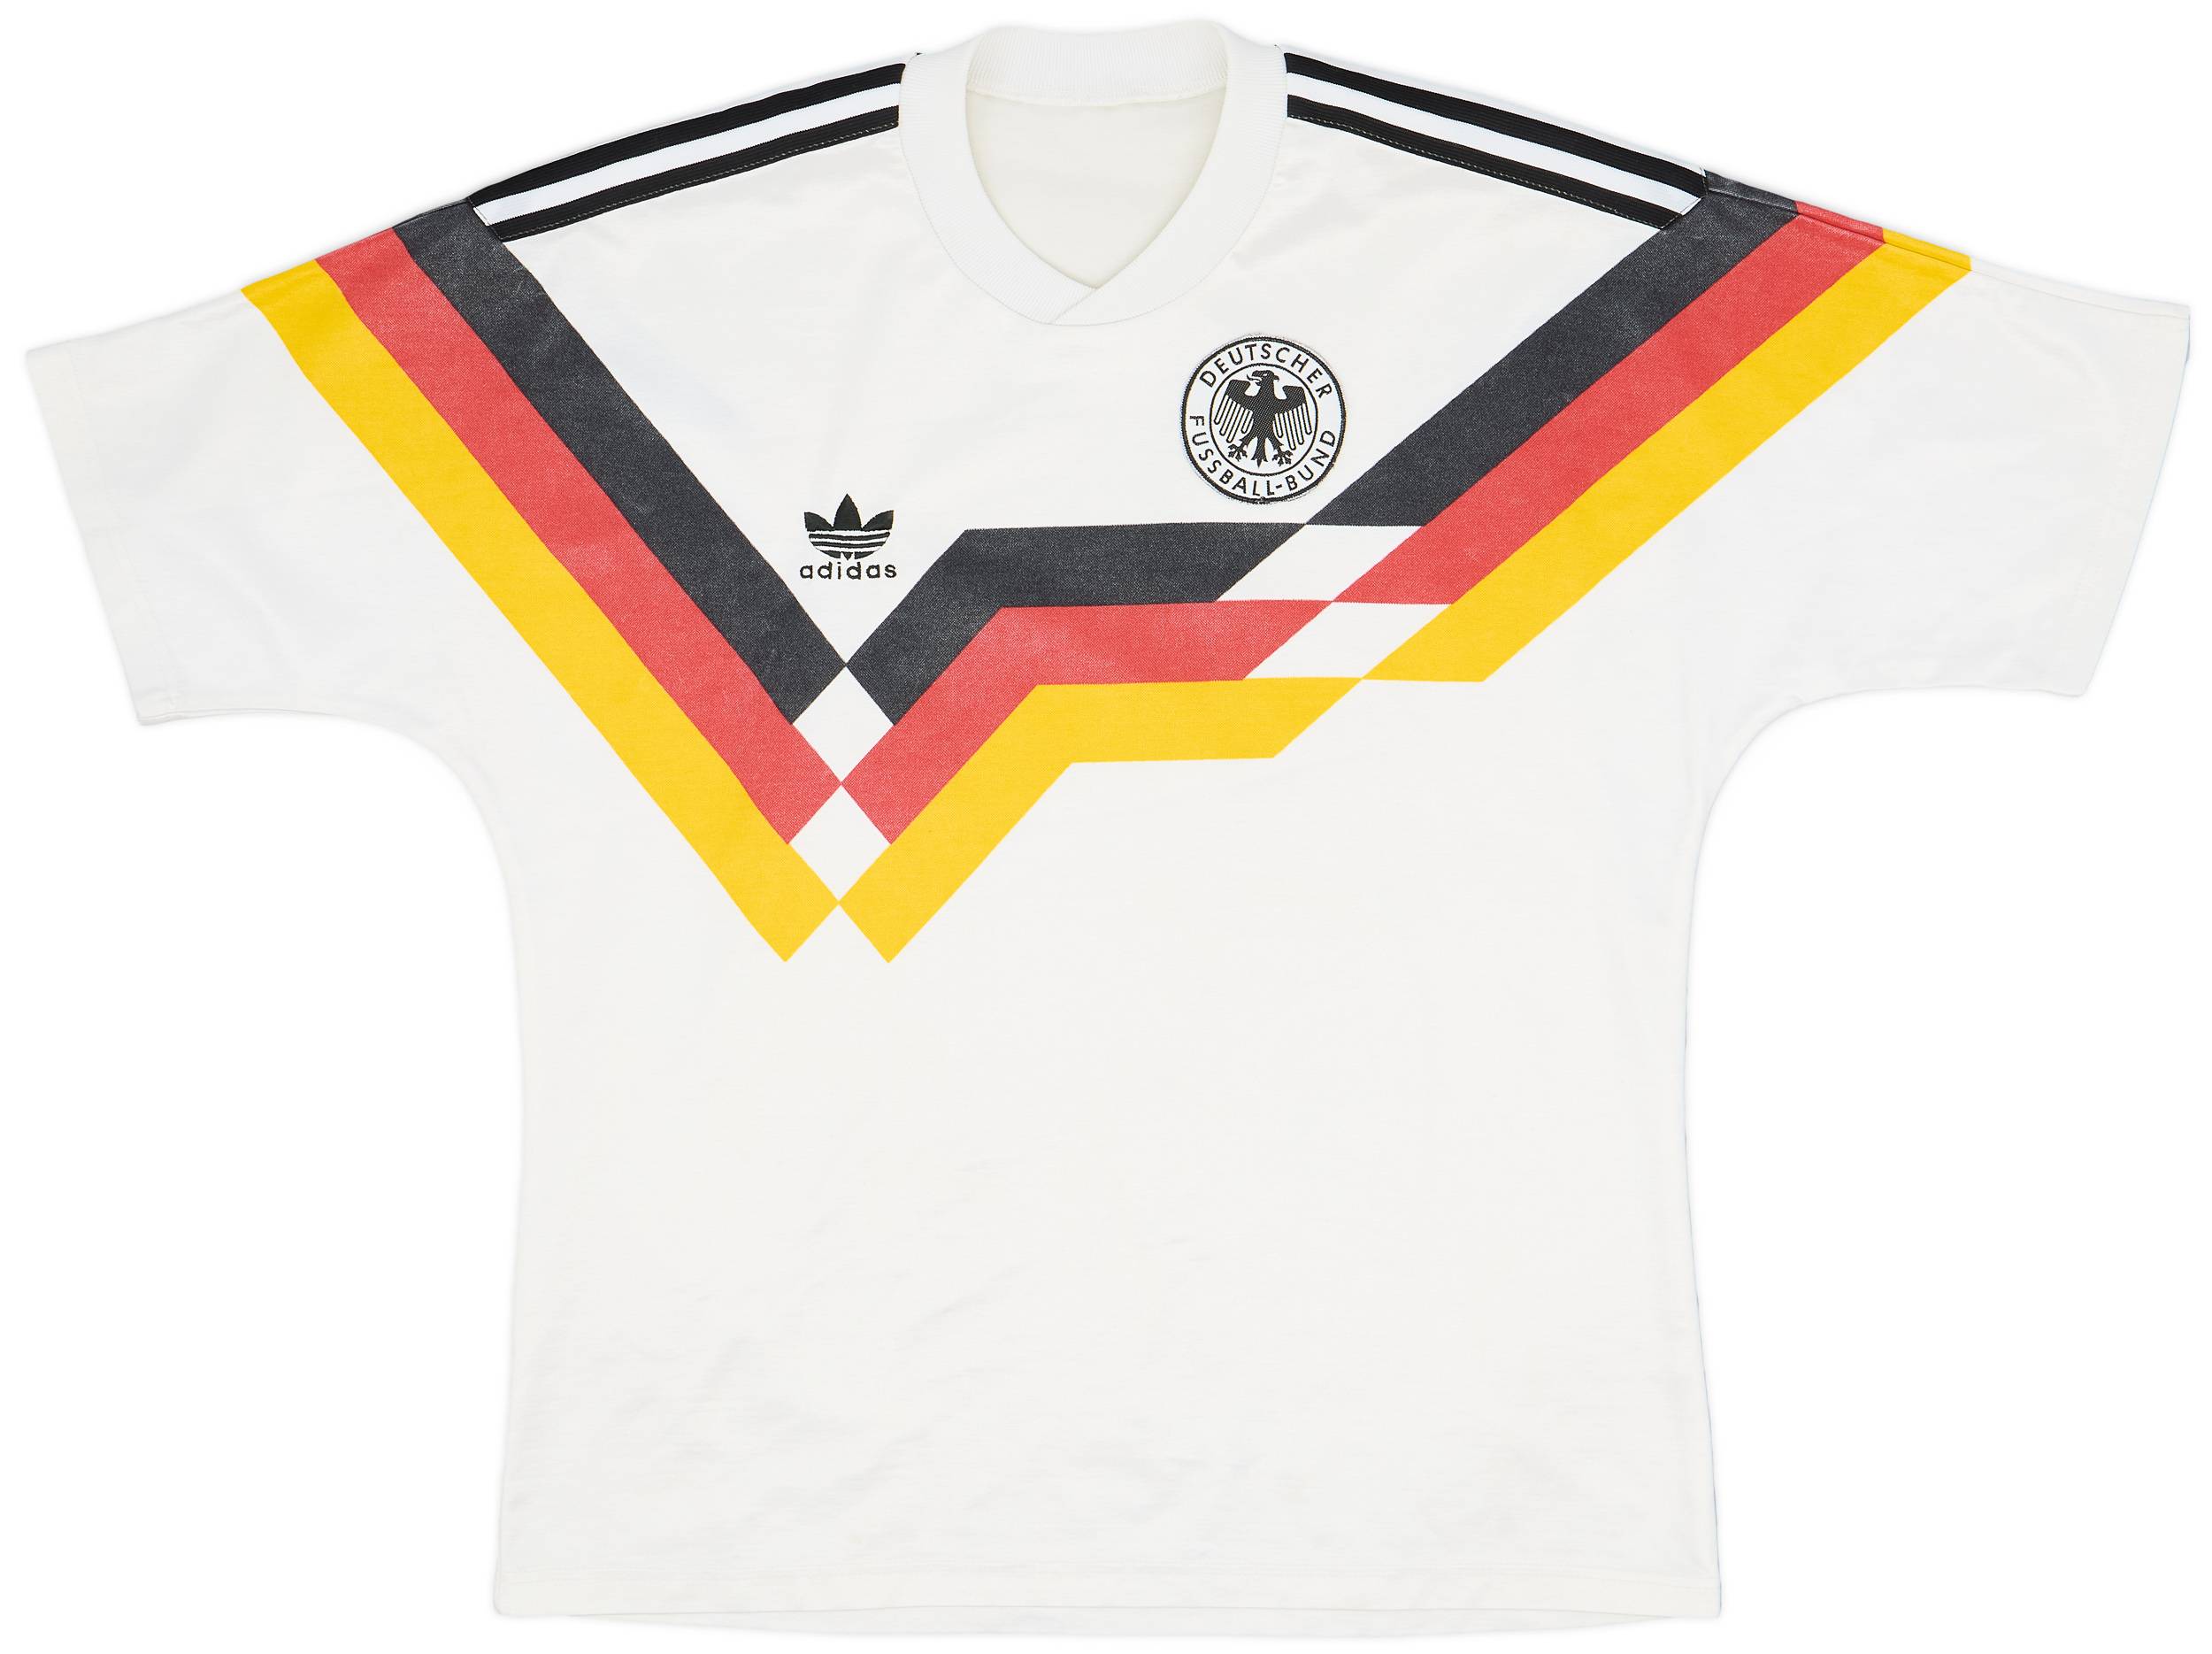 1988-90 West Germany Home Shirt - 9/10 - (L)